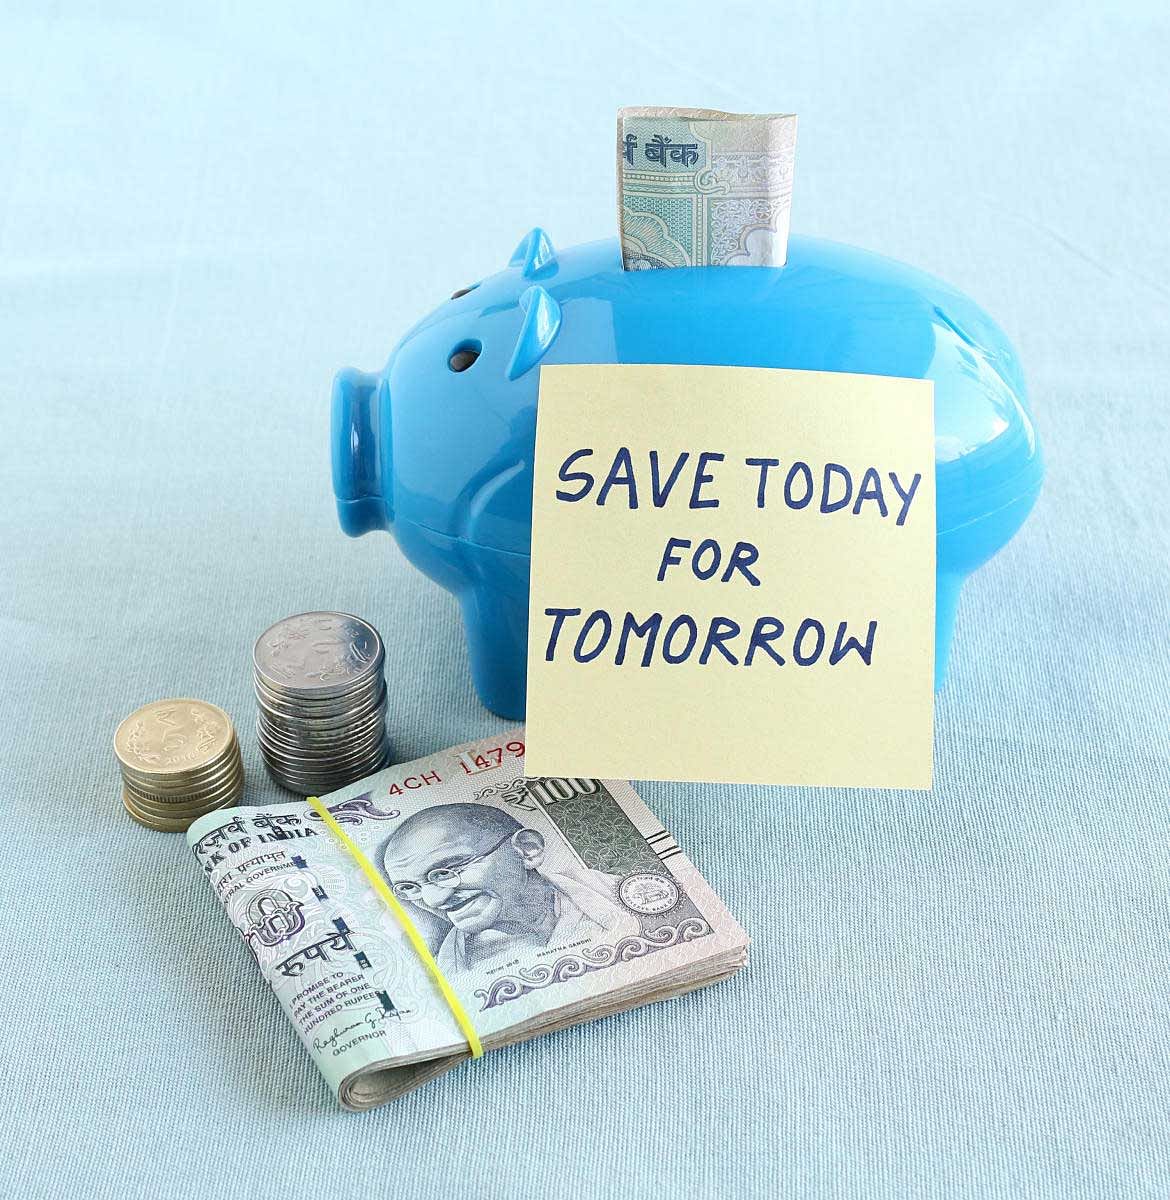 The right way to start saving early